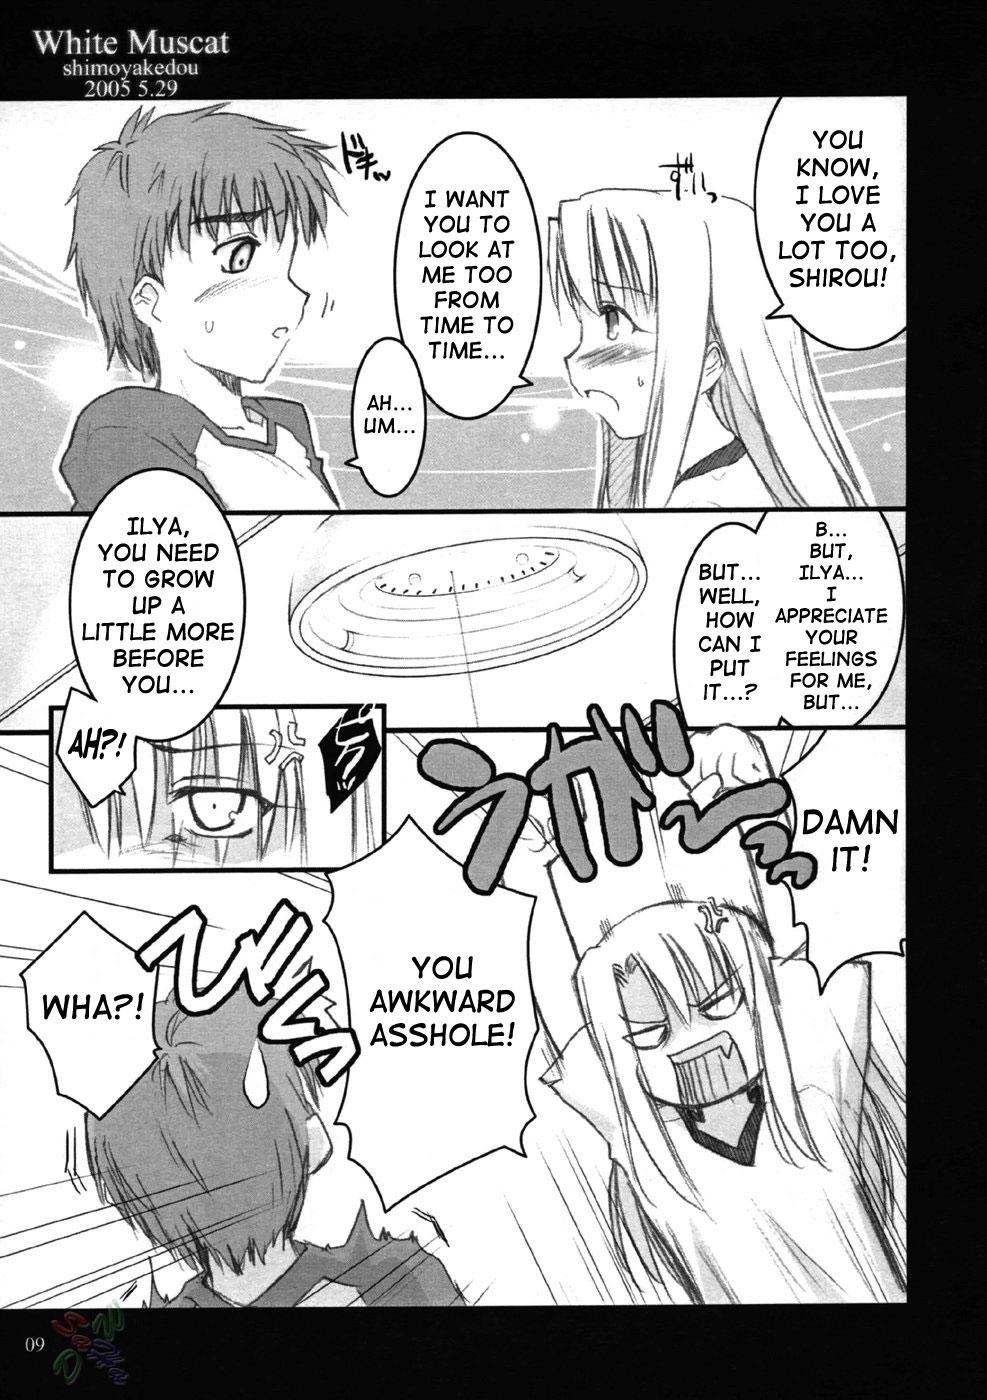 Best Blowjobs White Muscat - Fate stay night Gay Smoking - Page 8